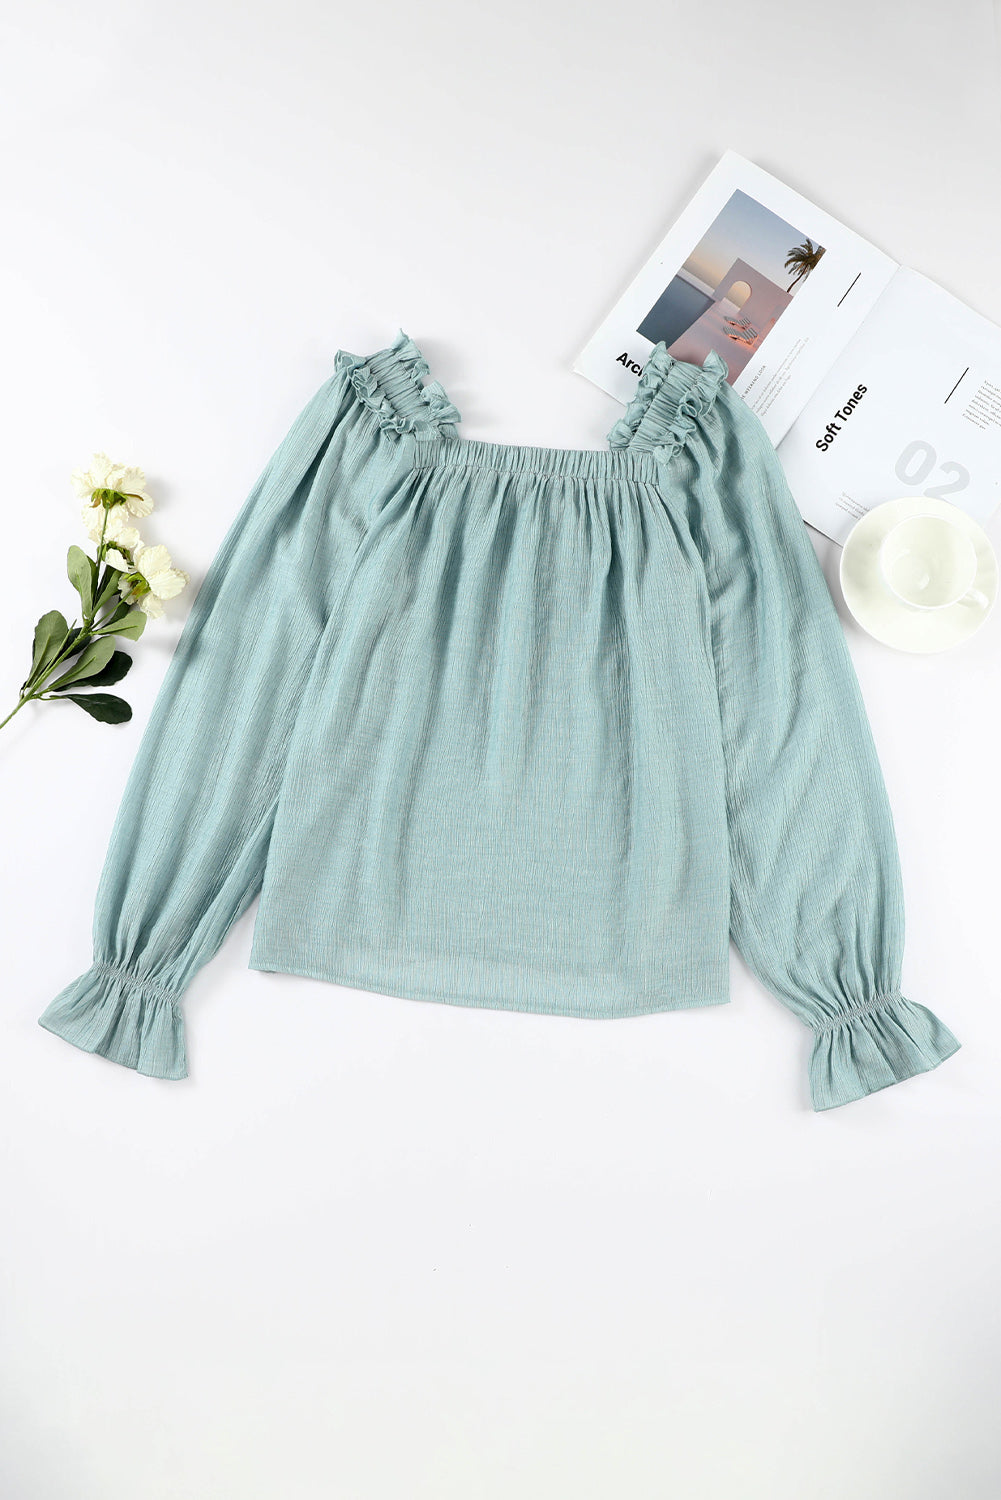 Ruffled Square Neck Cuffs Long Sleeve Blouse